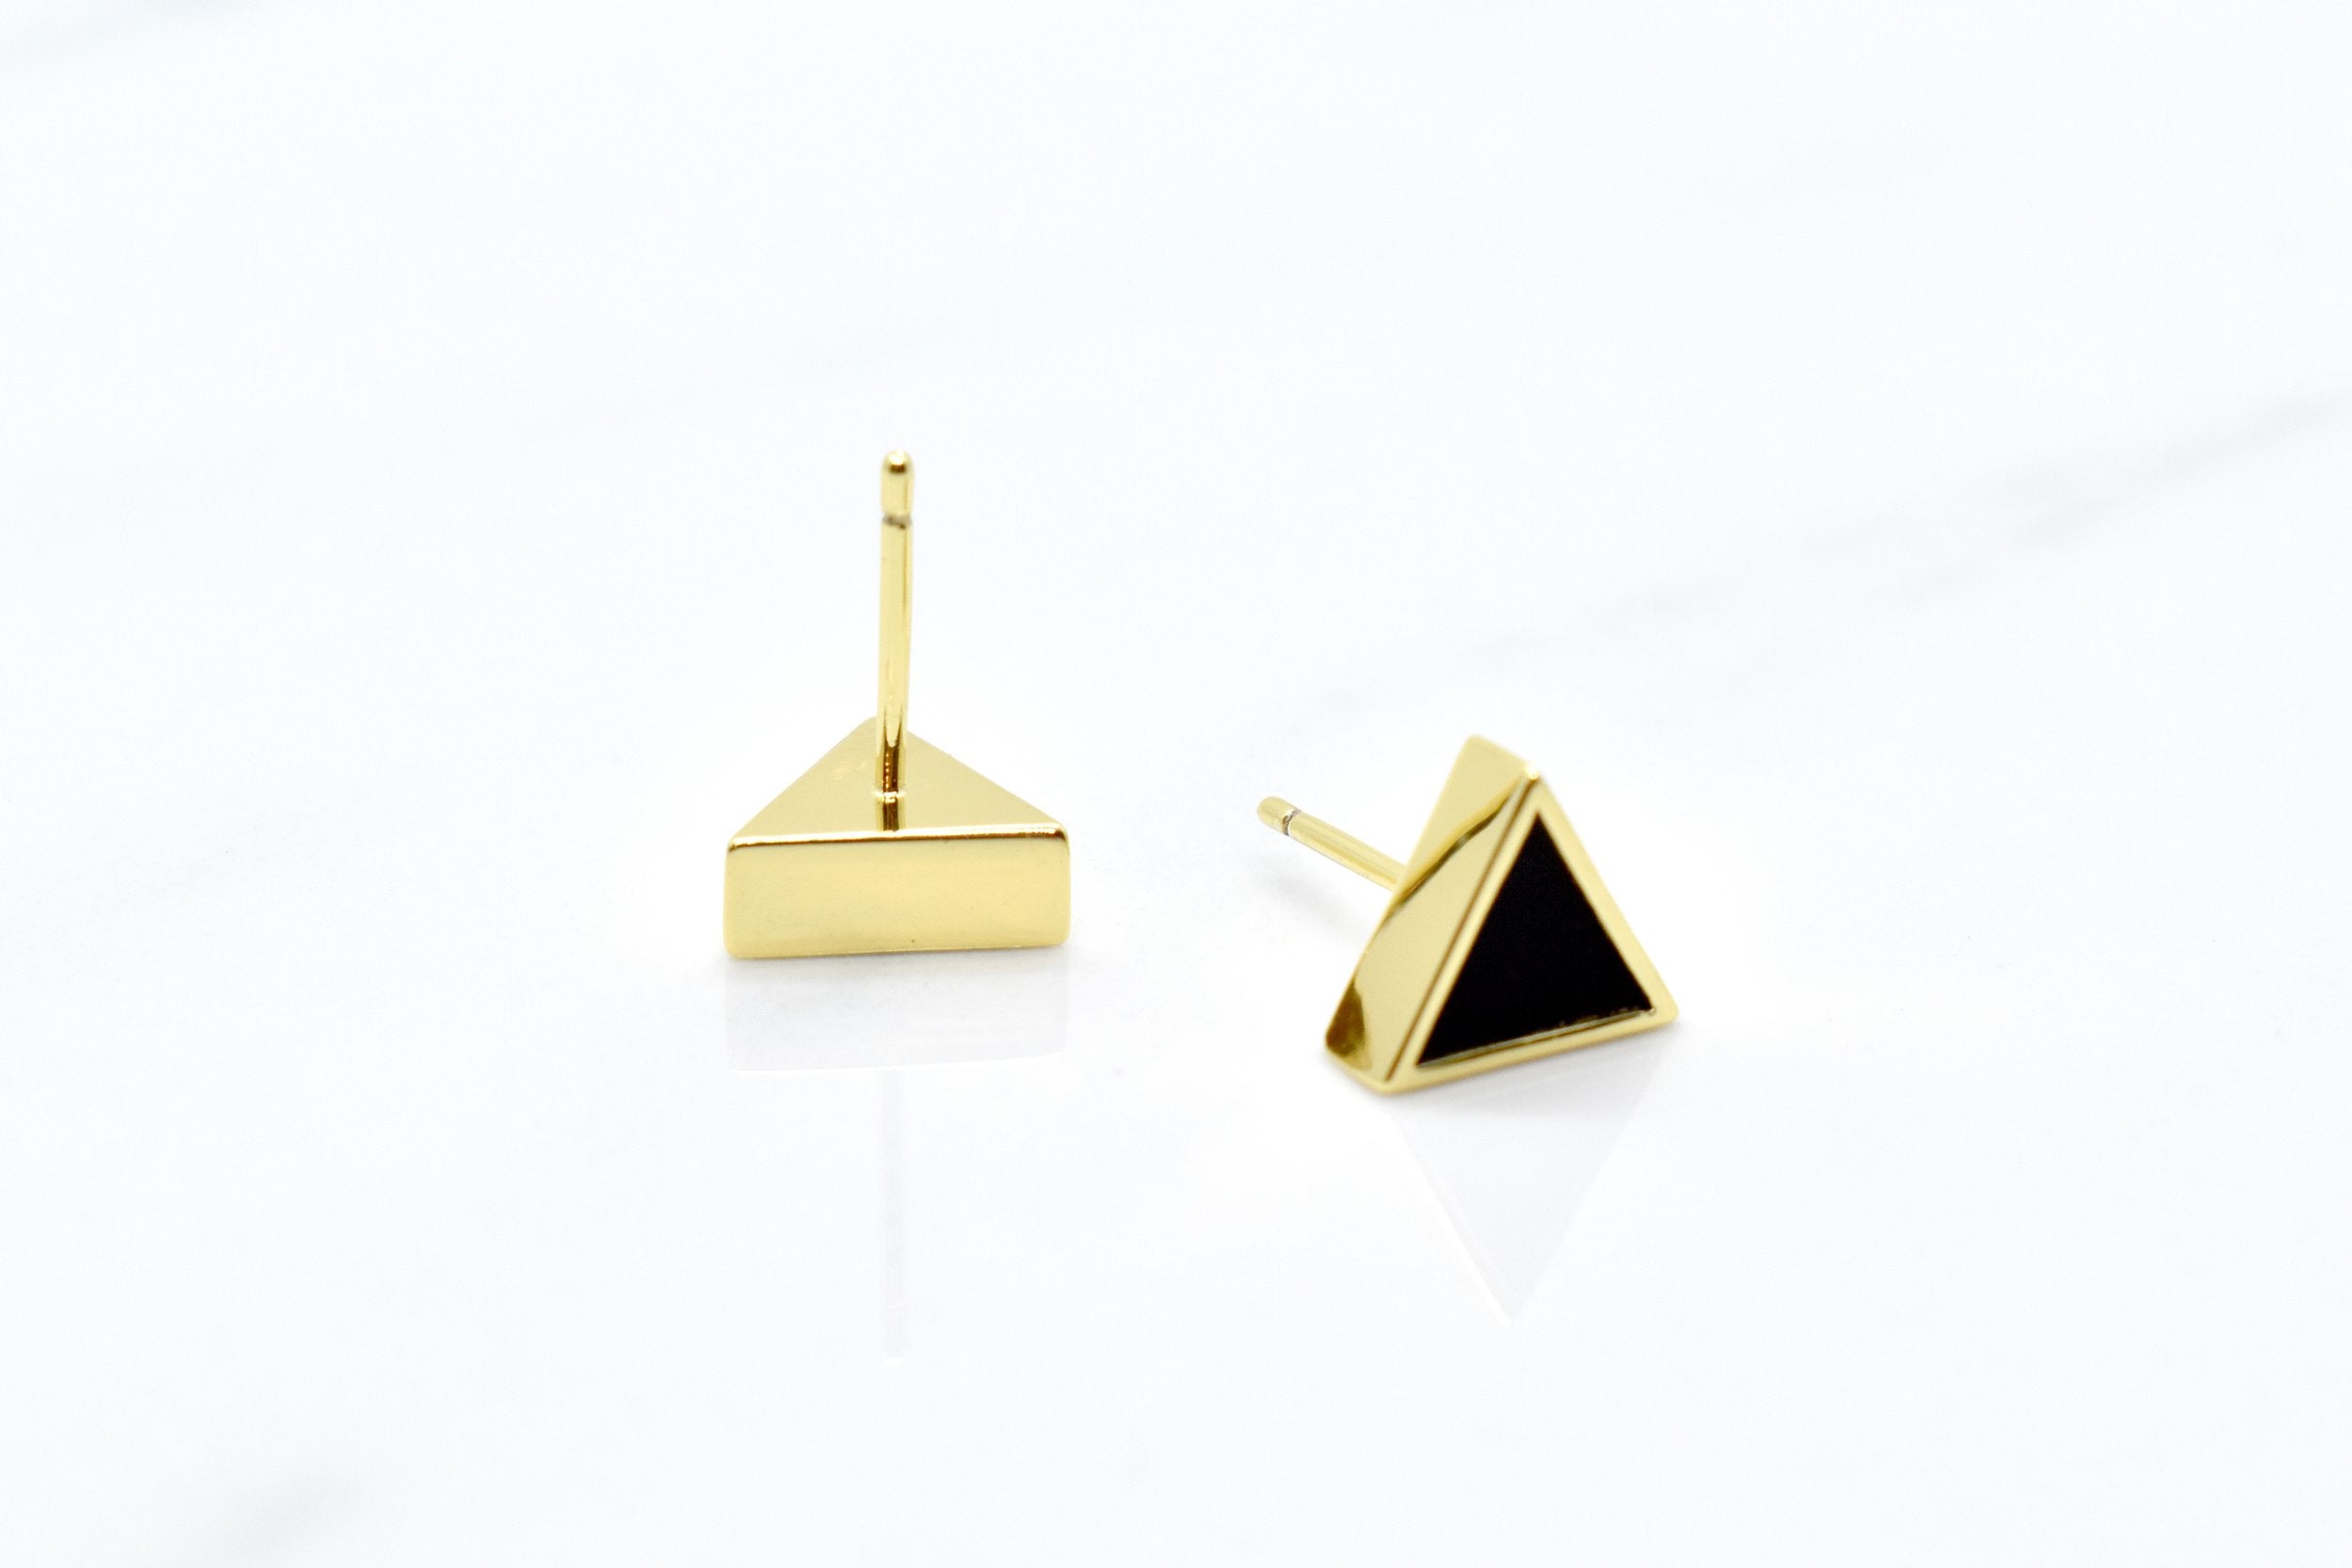 onyx black triangle studs in 14k gold plated sterling silver or 14k gold plated brass